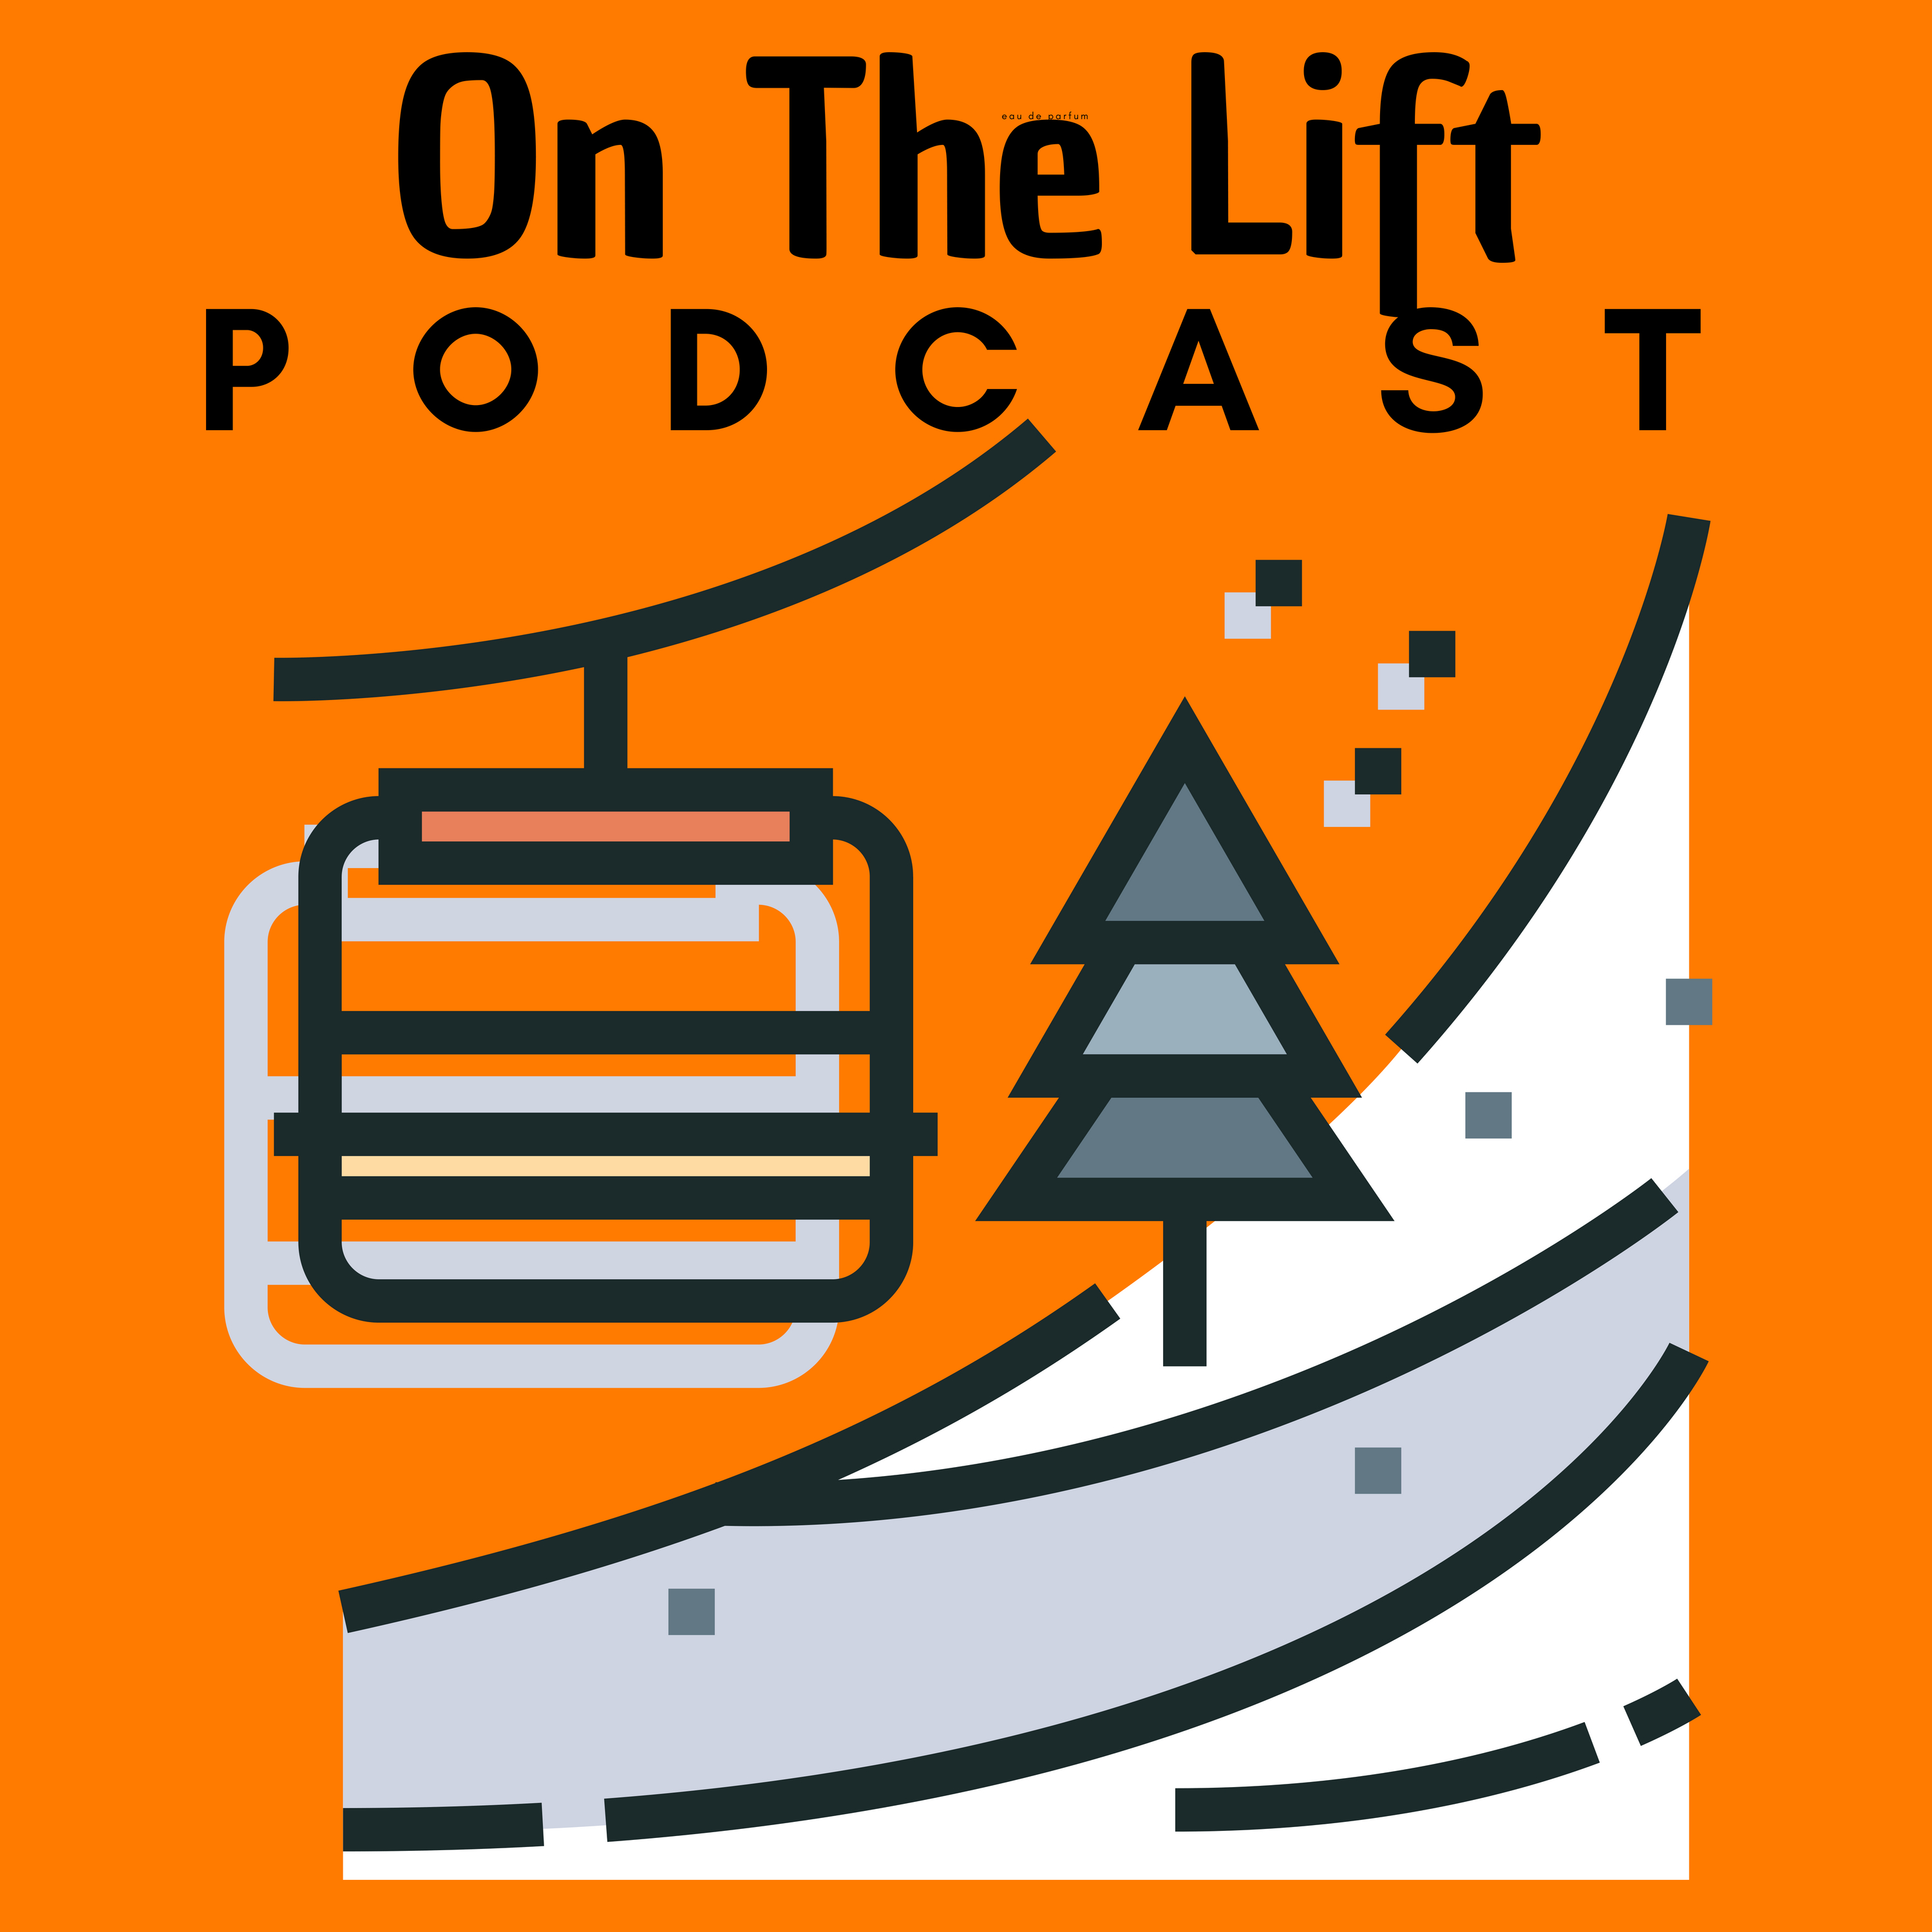 On The Ski Lift Skiing Podcast